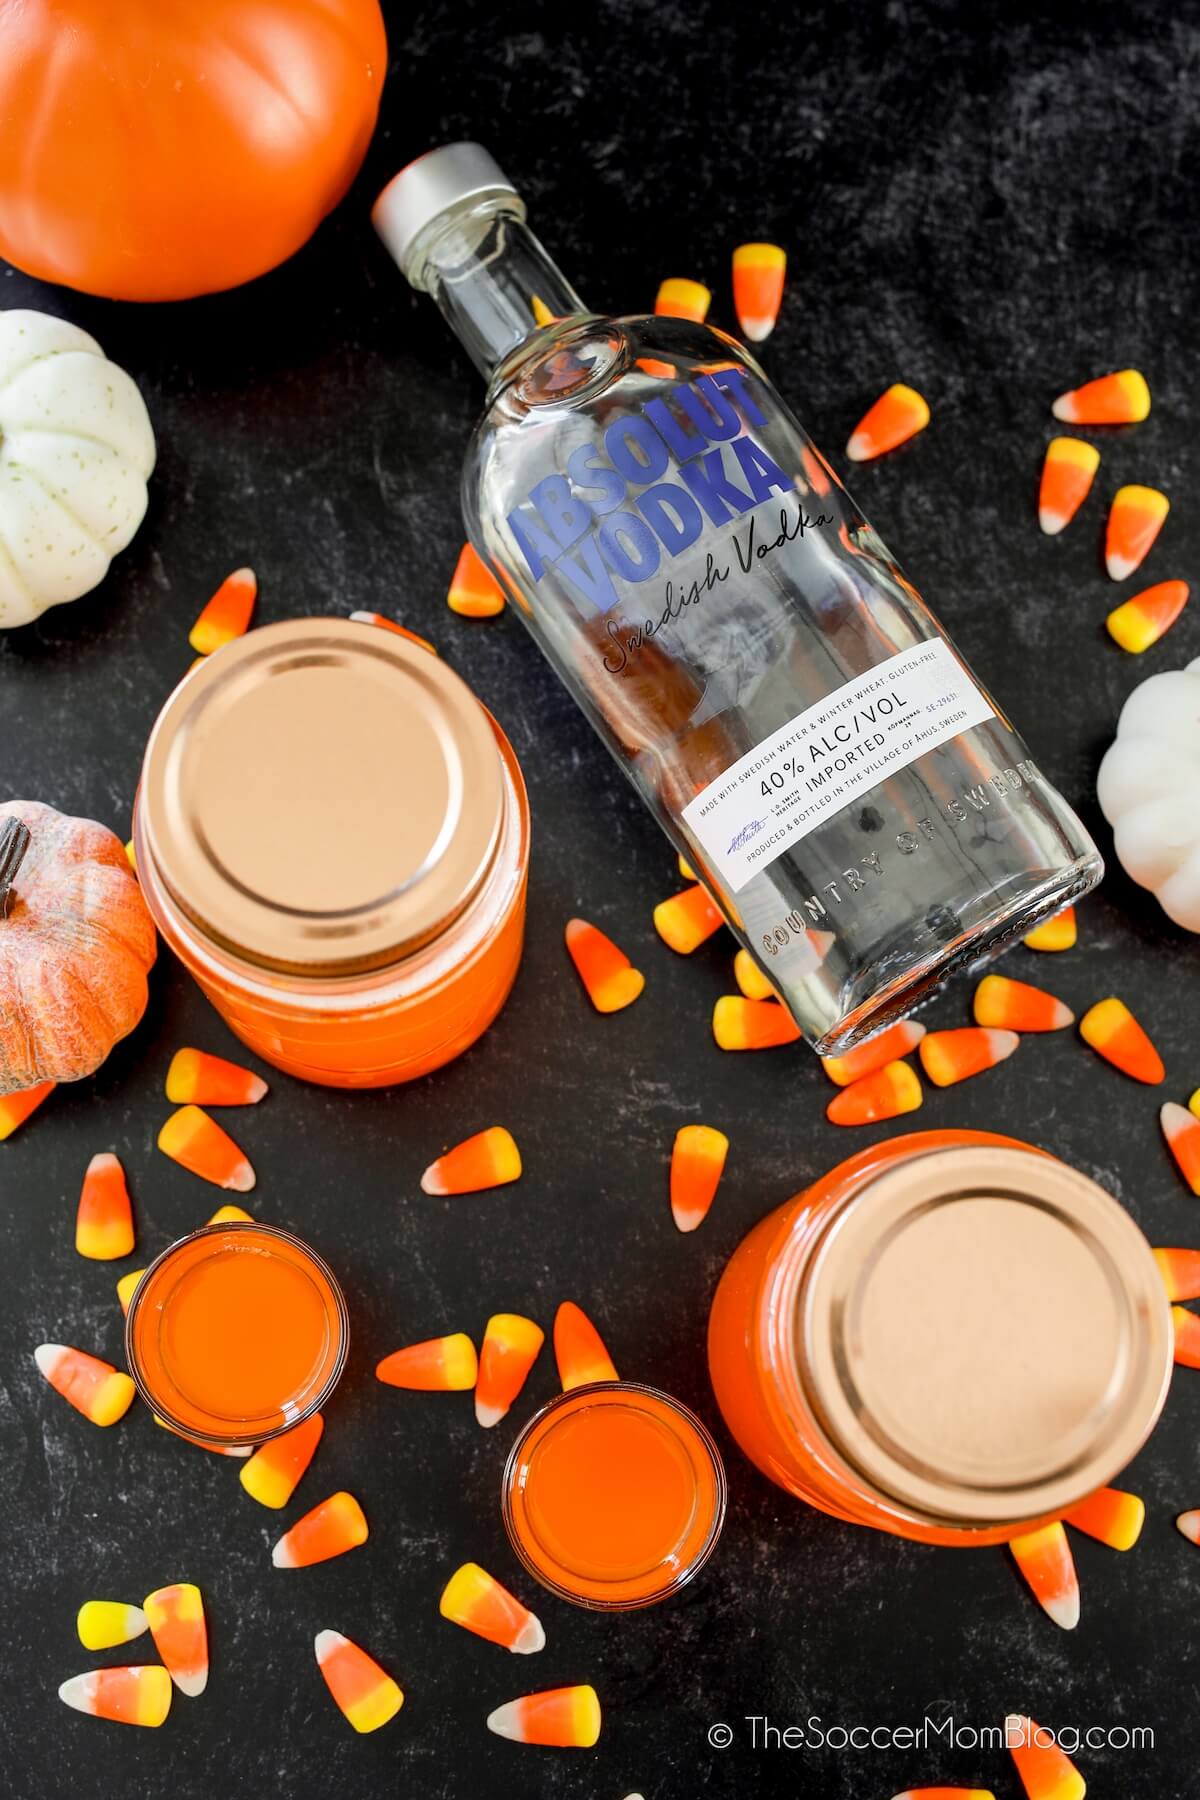 flat lay photo of jars of homemade moonshine, candy corn, Absolut vodka bottle